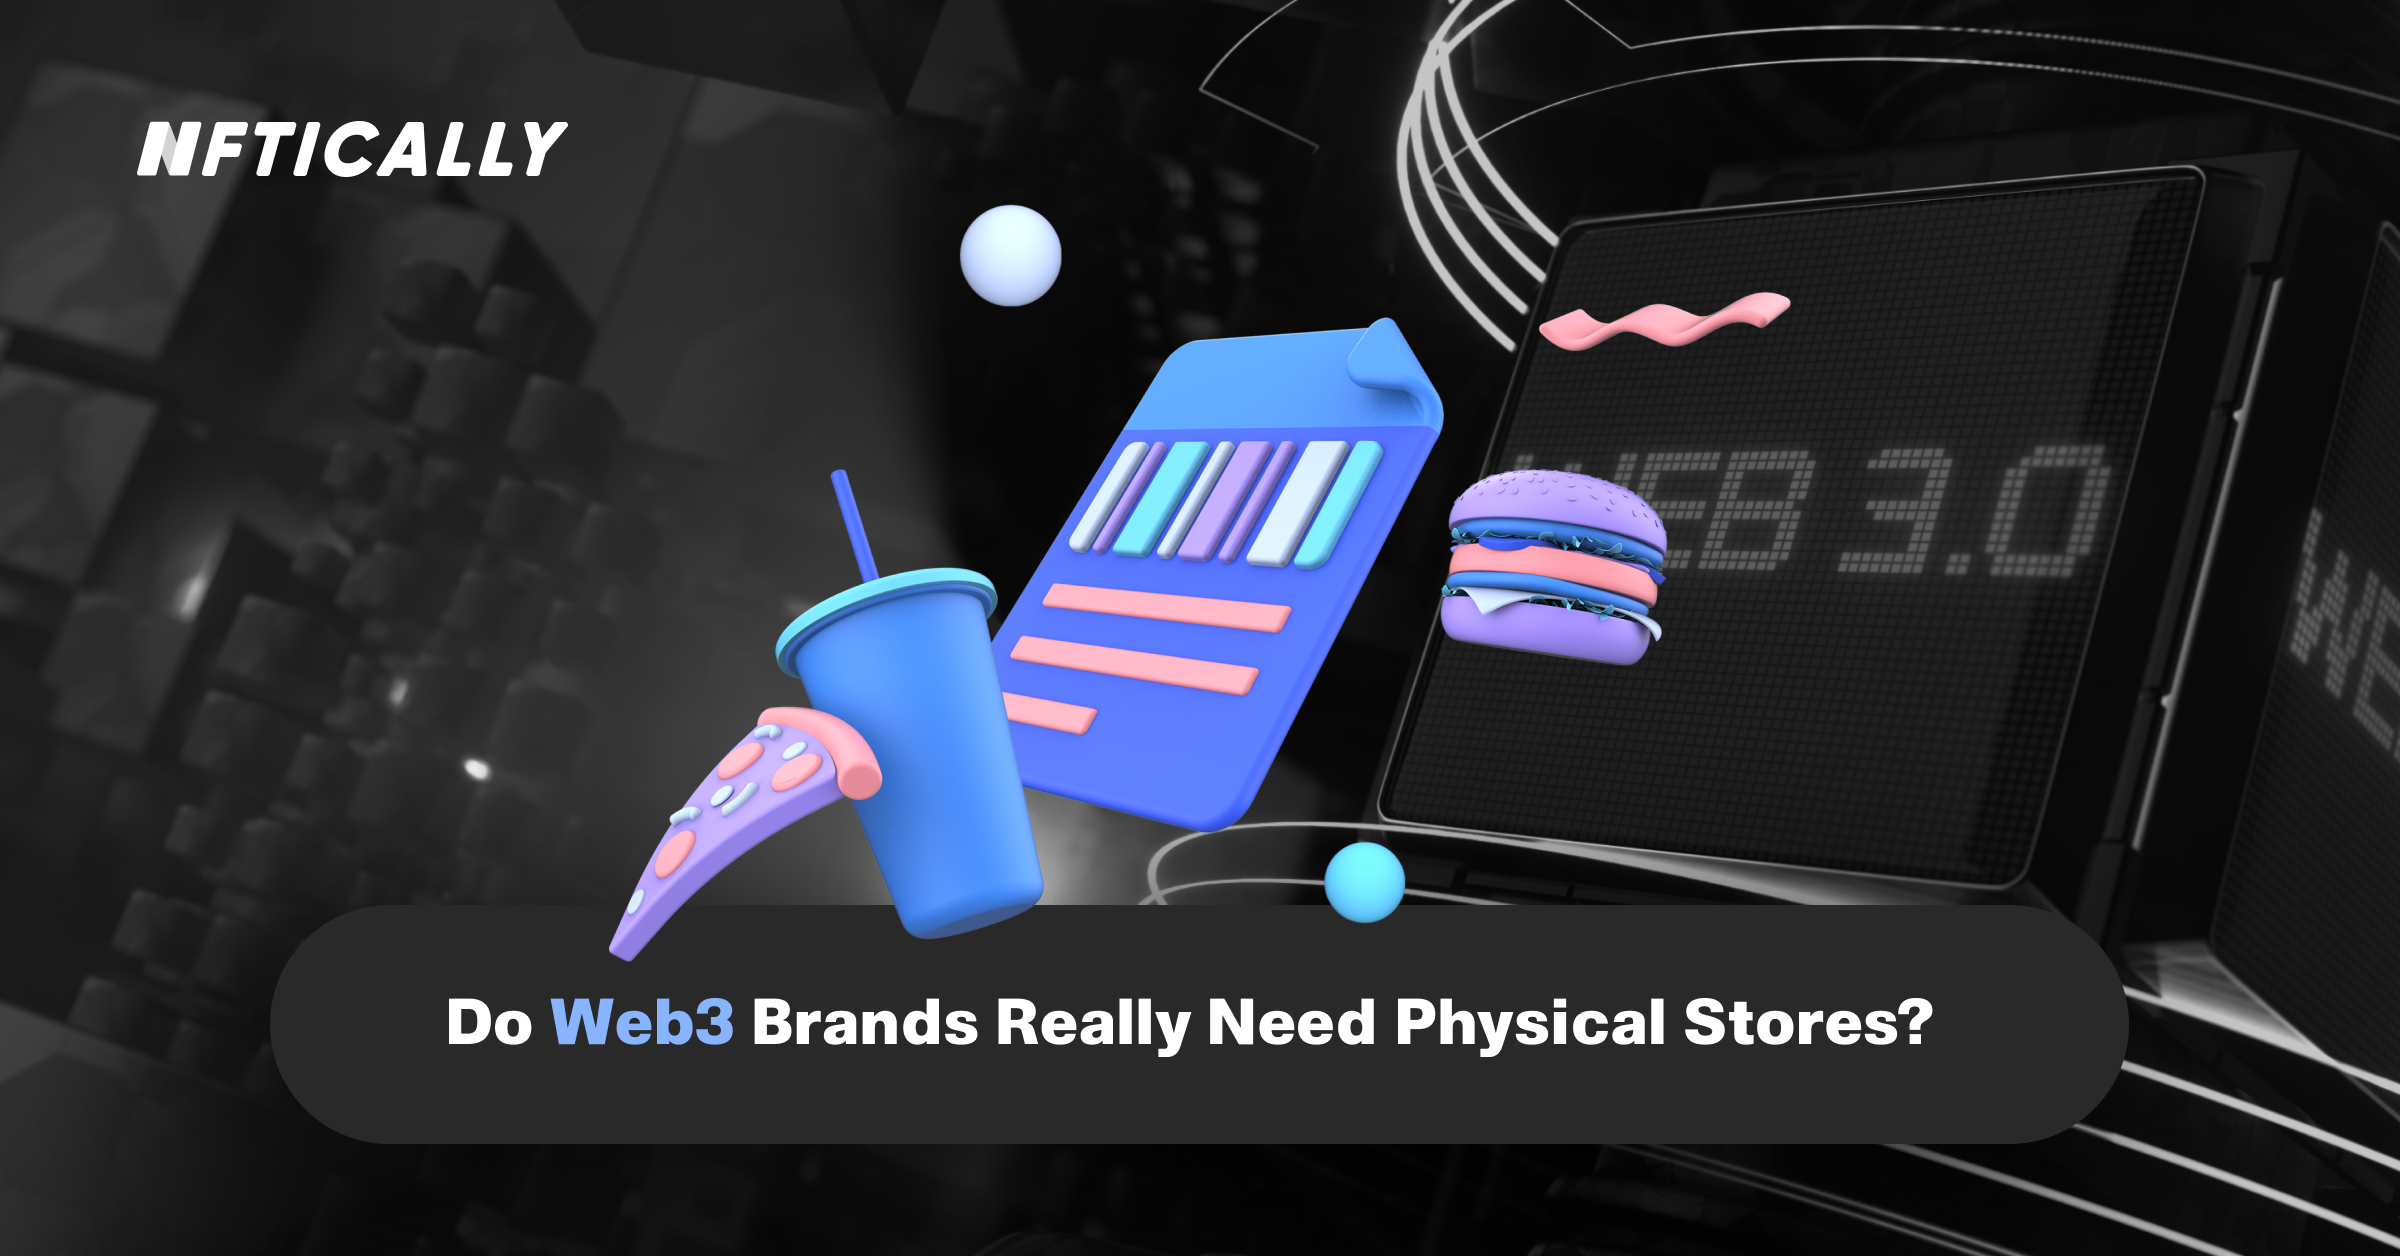 Do Web3 Brands Really Need Physical Stores?